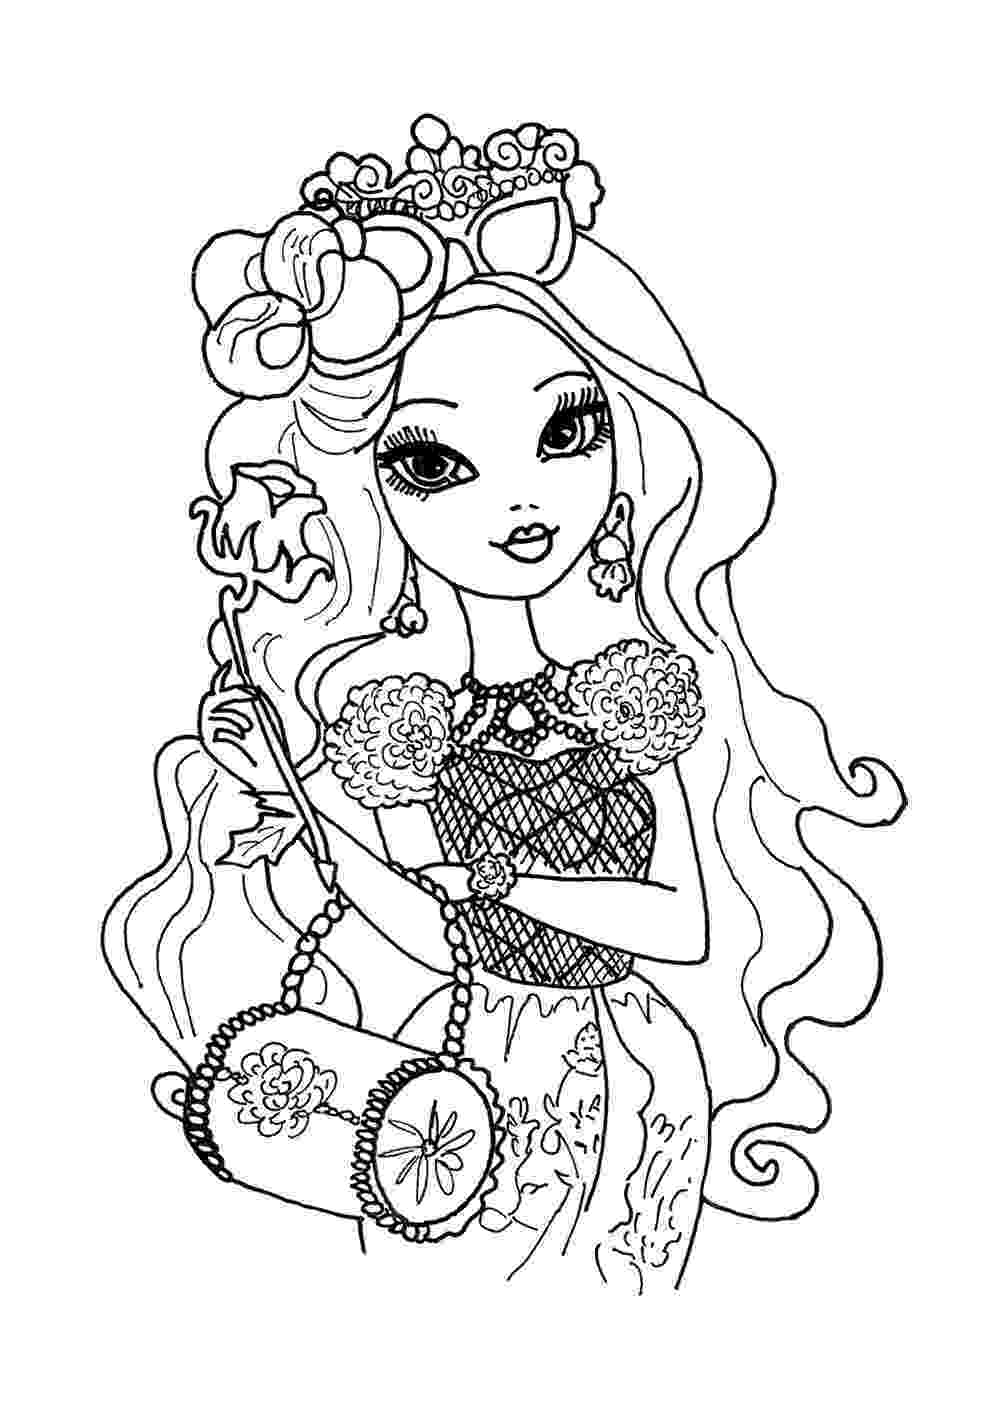 free coloring pages download ever after high coloring pages to download and print for free download coloring pages free 